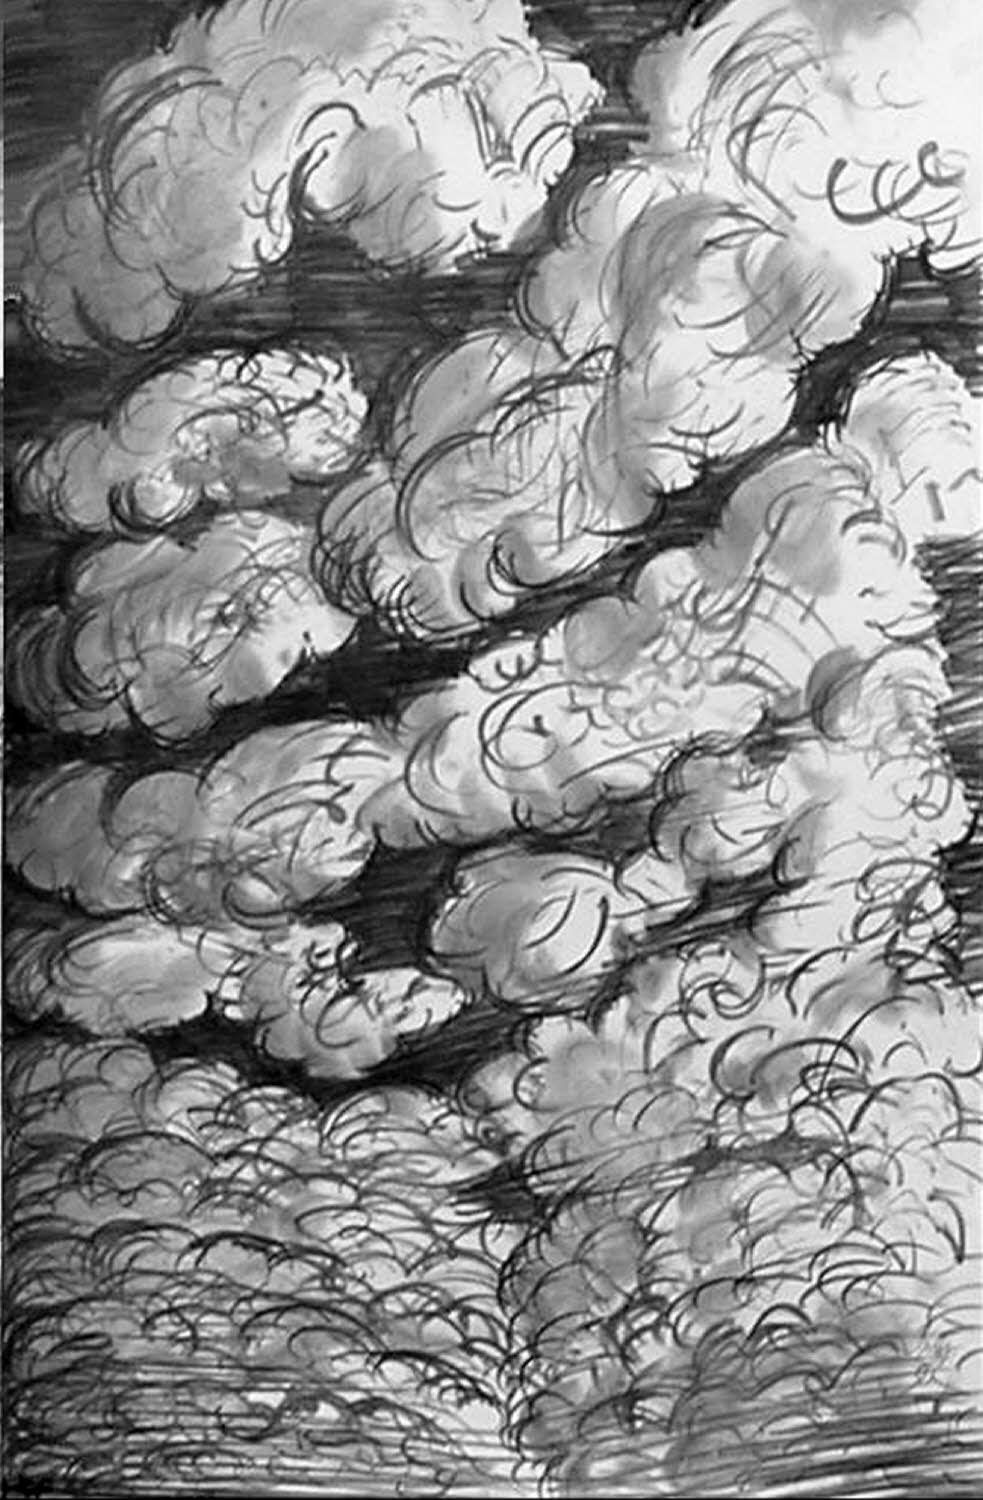 Virginia Beach, 2005, graphite on synthetic paper, 26x17 inches